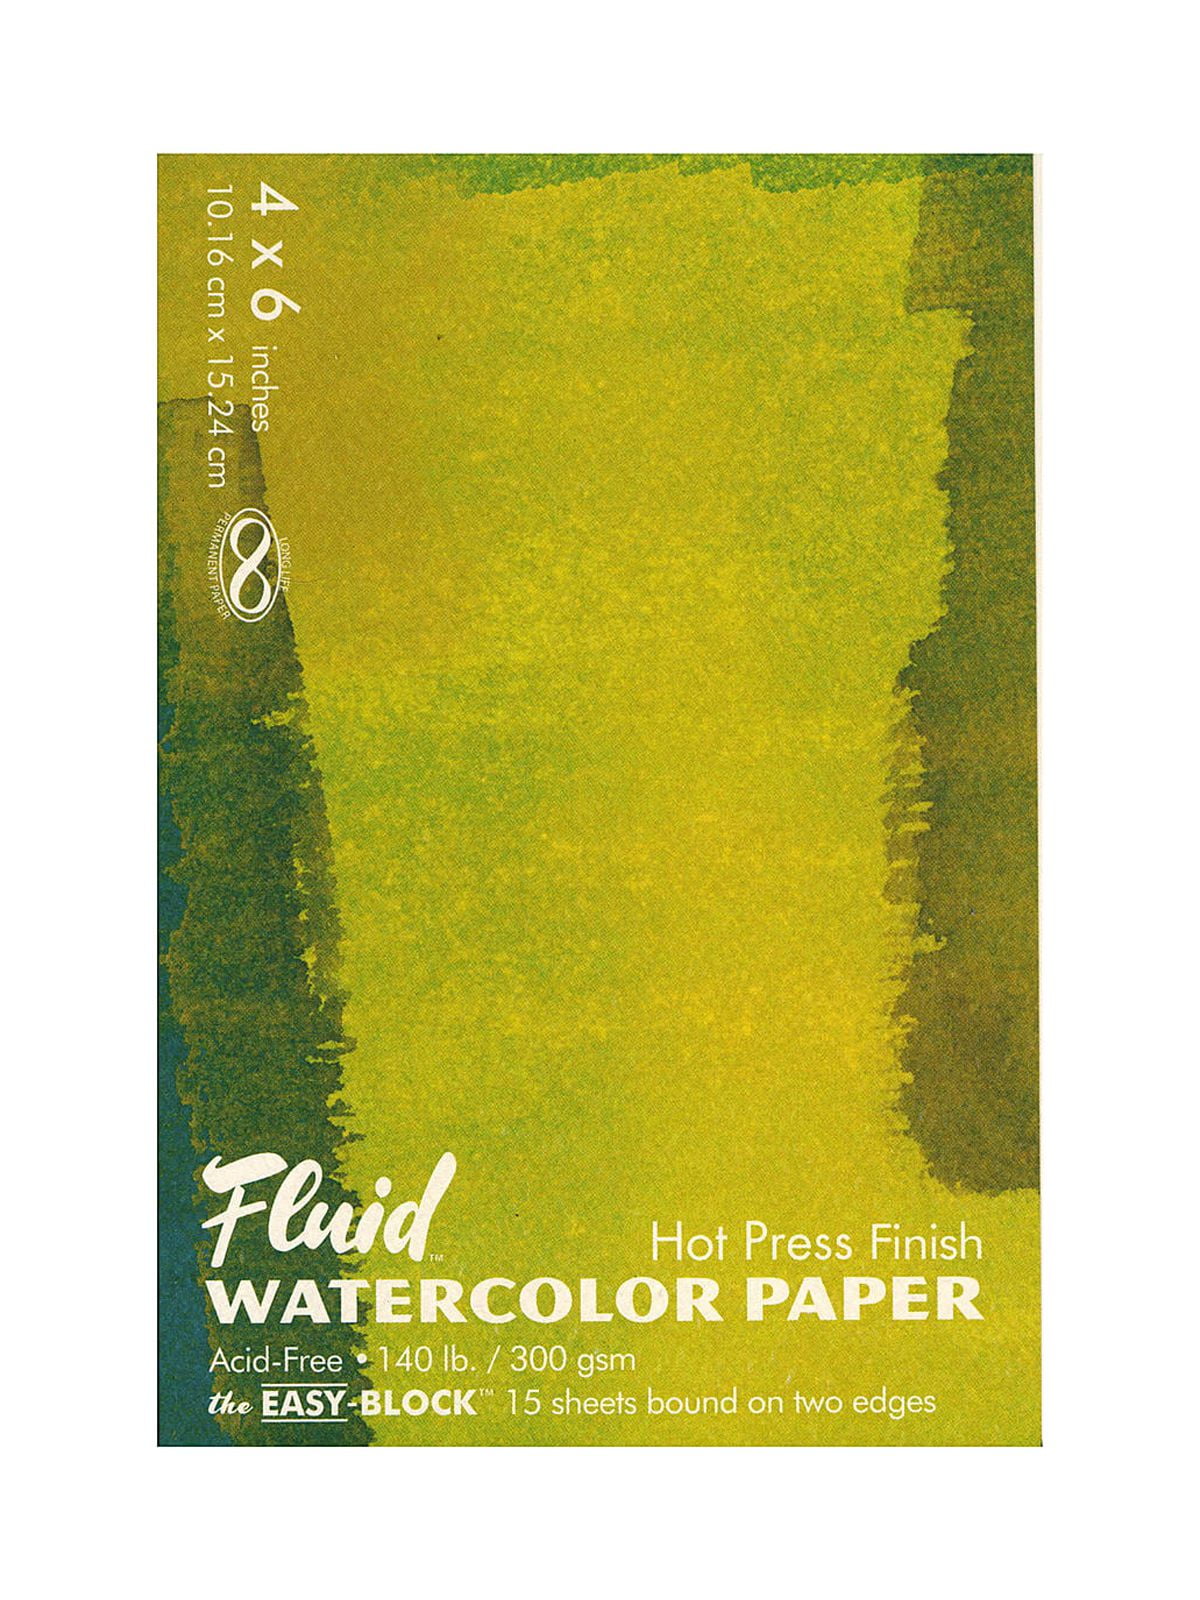 Bee Paper Watercolor 140# Sheets - 6-inch x 9-inch